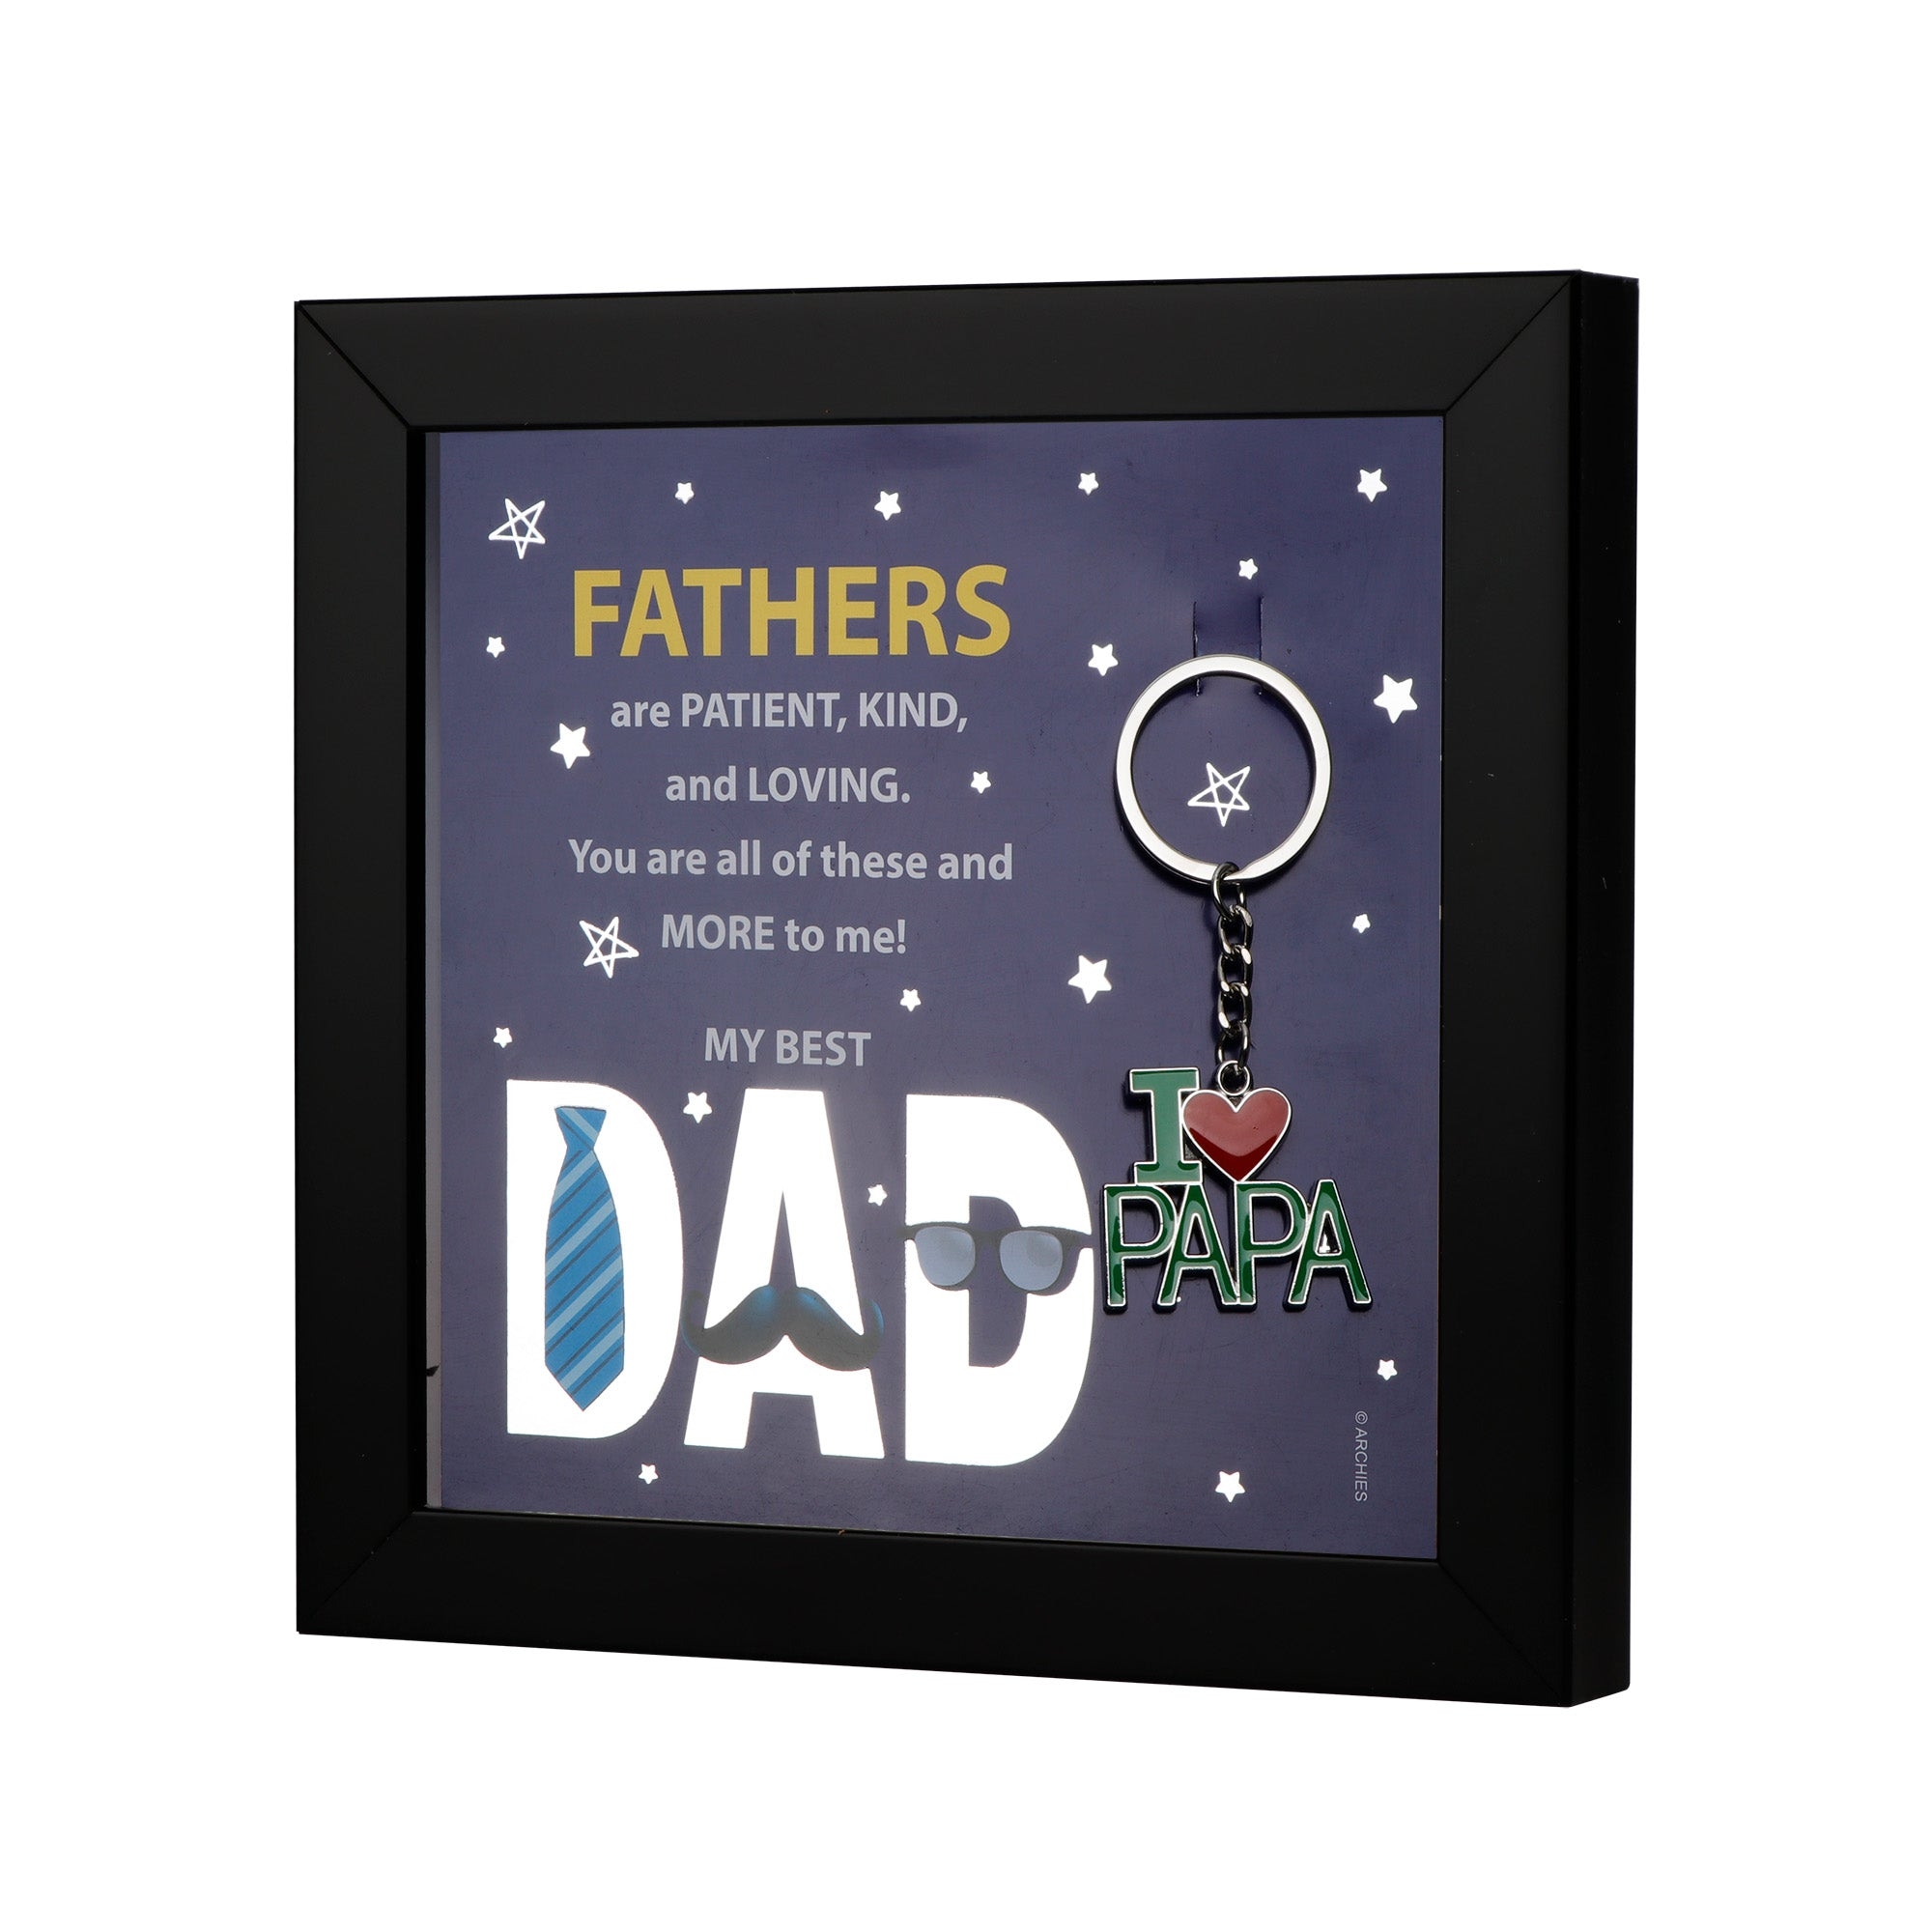 Archies KEEPSAKE QUOTATION - FATHERS ARE PATIENCE,KIND AND LOVING For gifting and Home décor